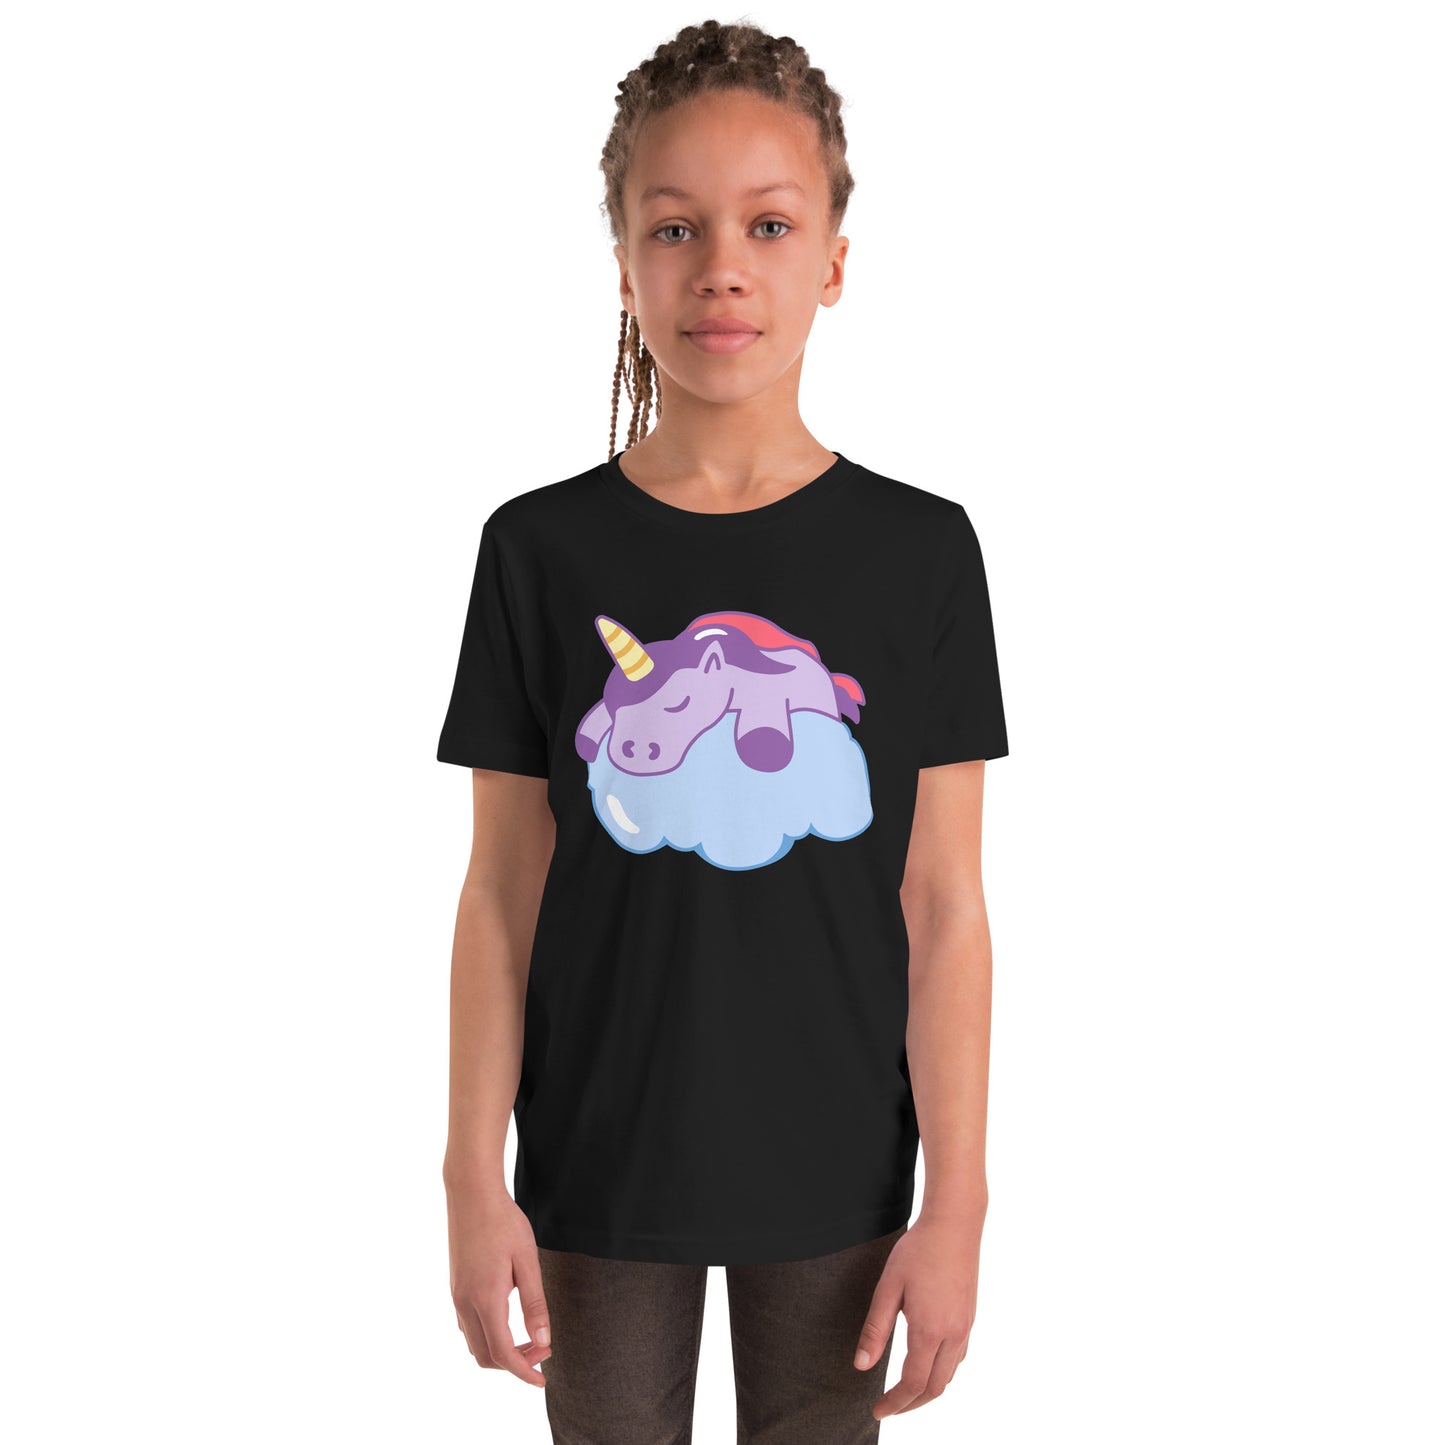 Youth with a black T-shirt with a print of a sleeping unicorn on a cloud